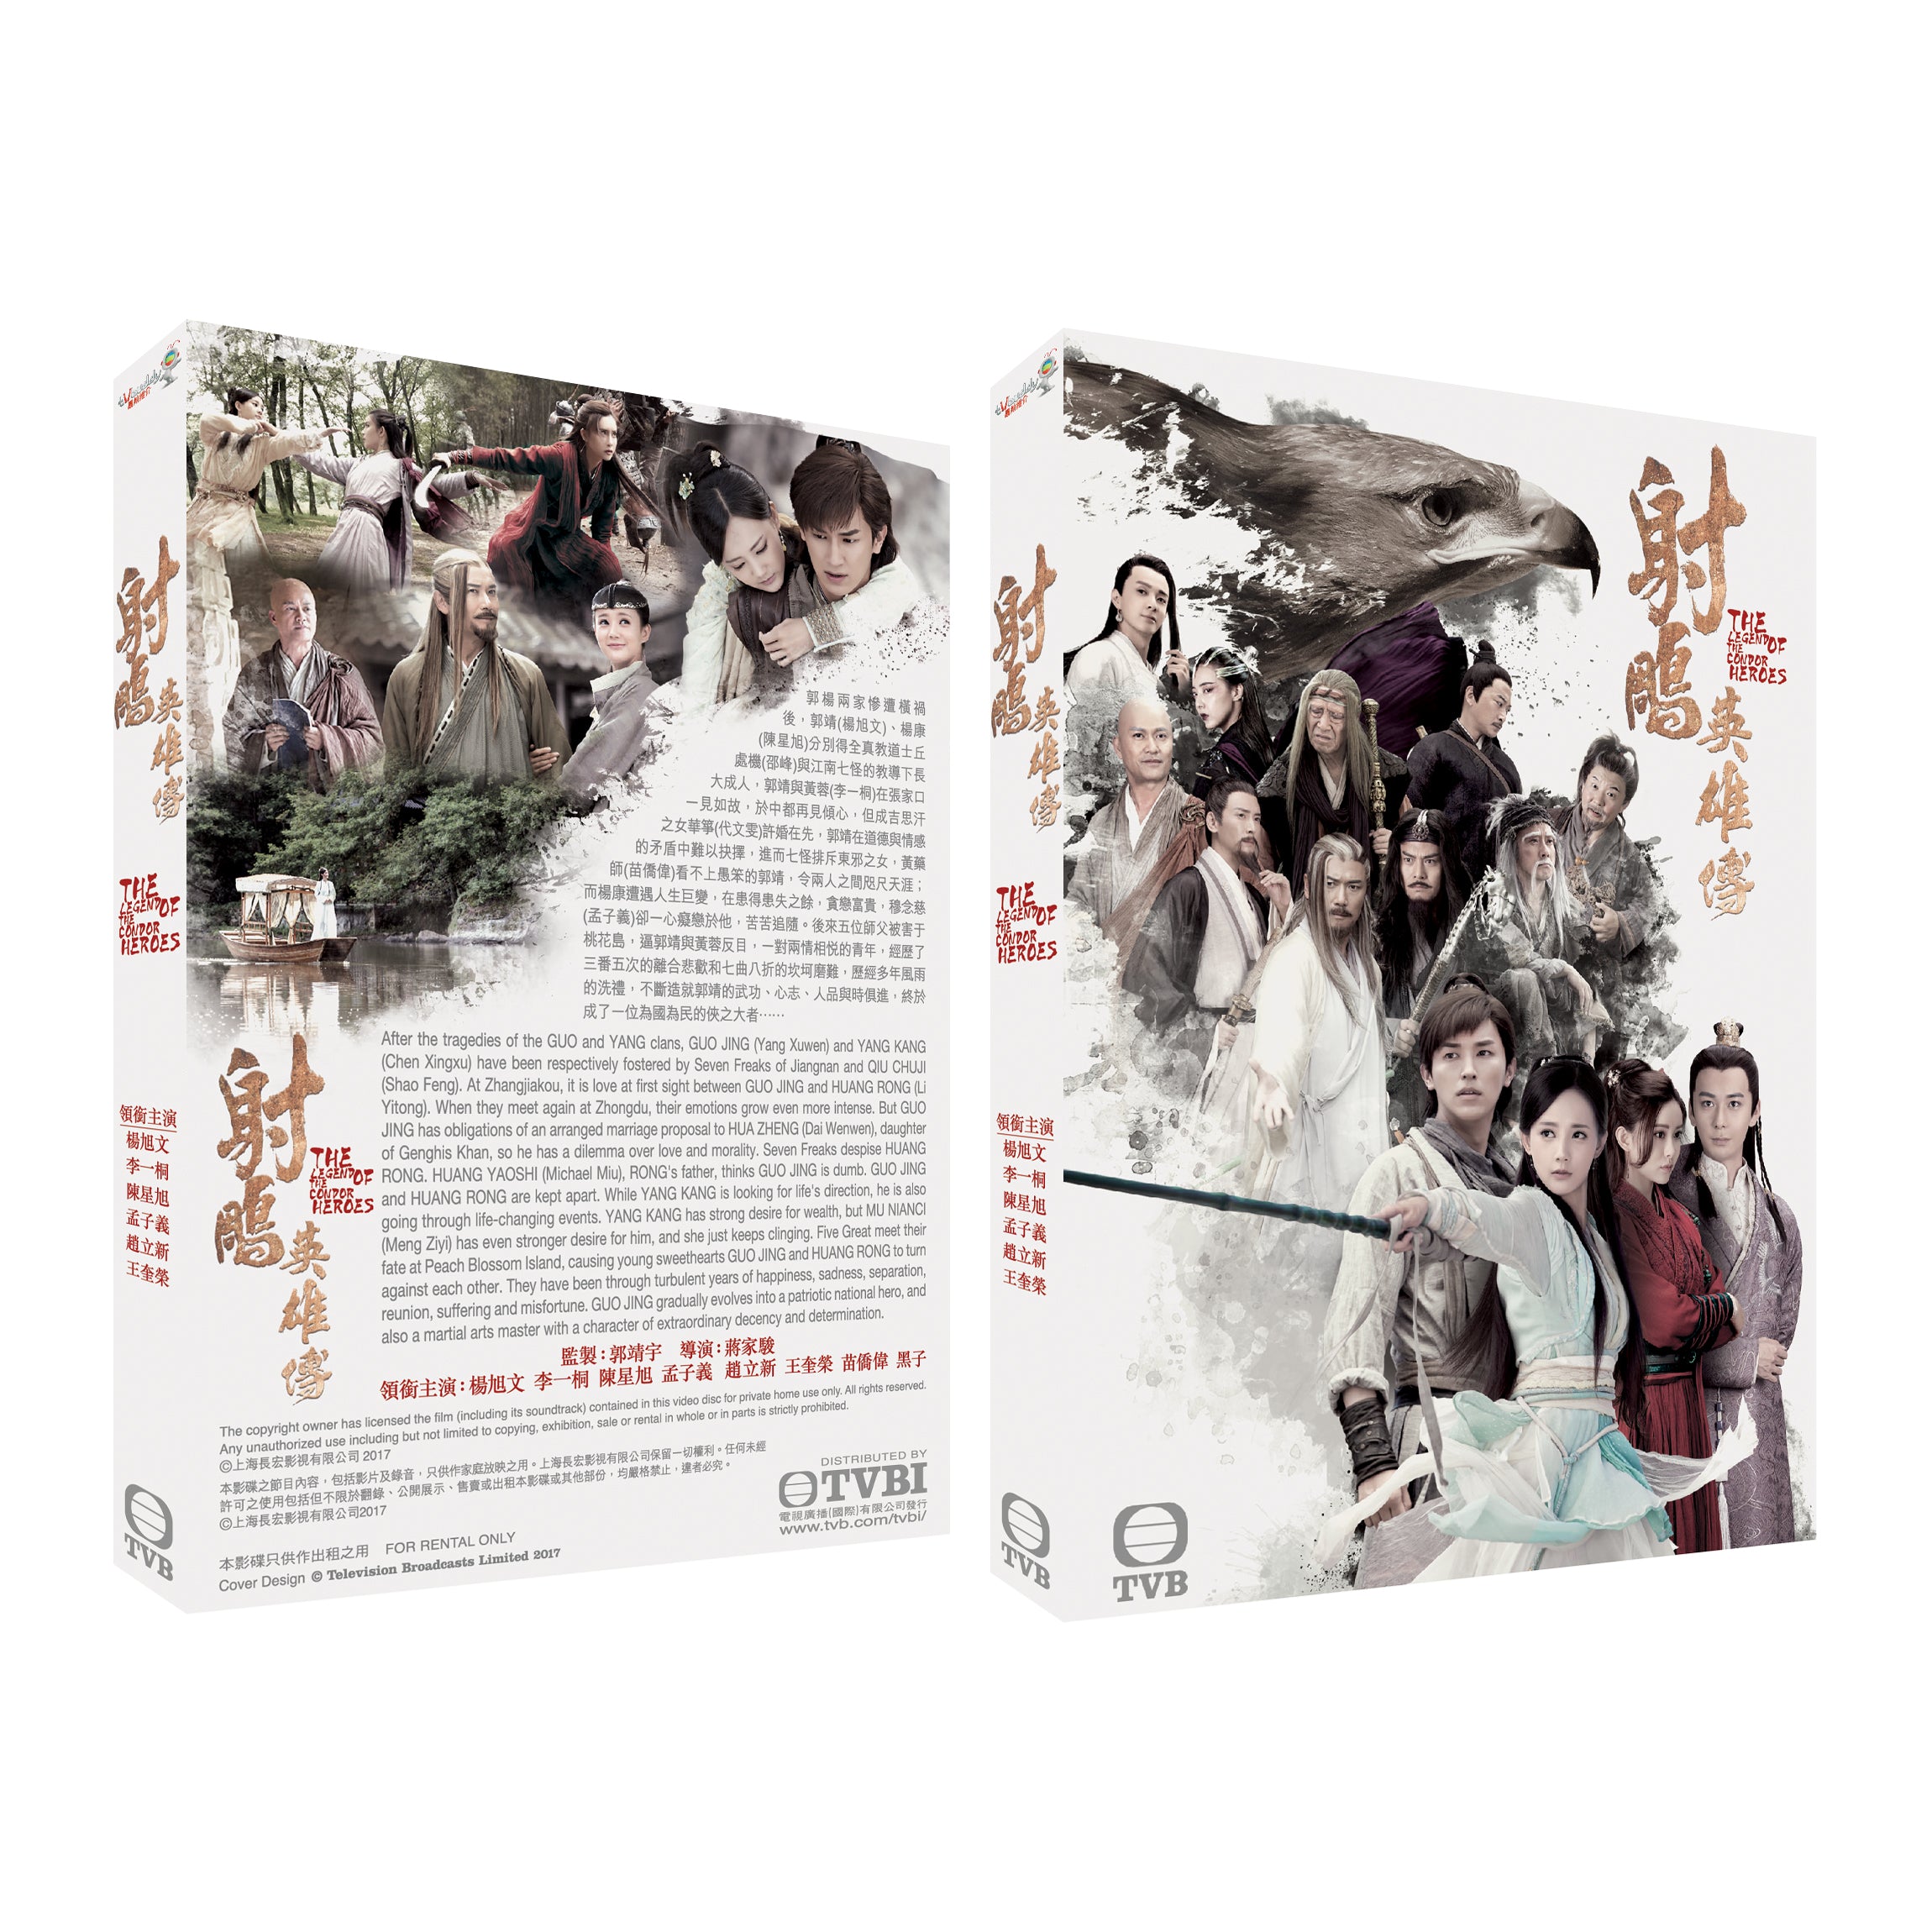 Mega Bazaar: The Legend of the Condor Heroes (PAL) Chinese Movie DVD with English Subtitles